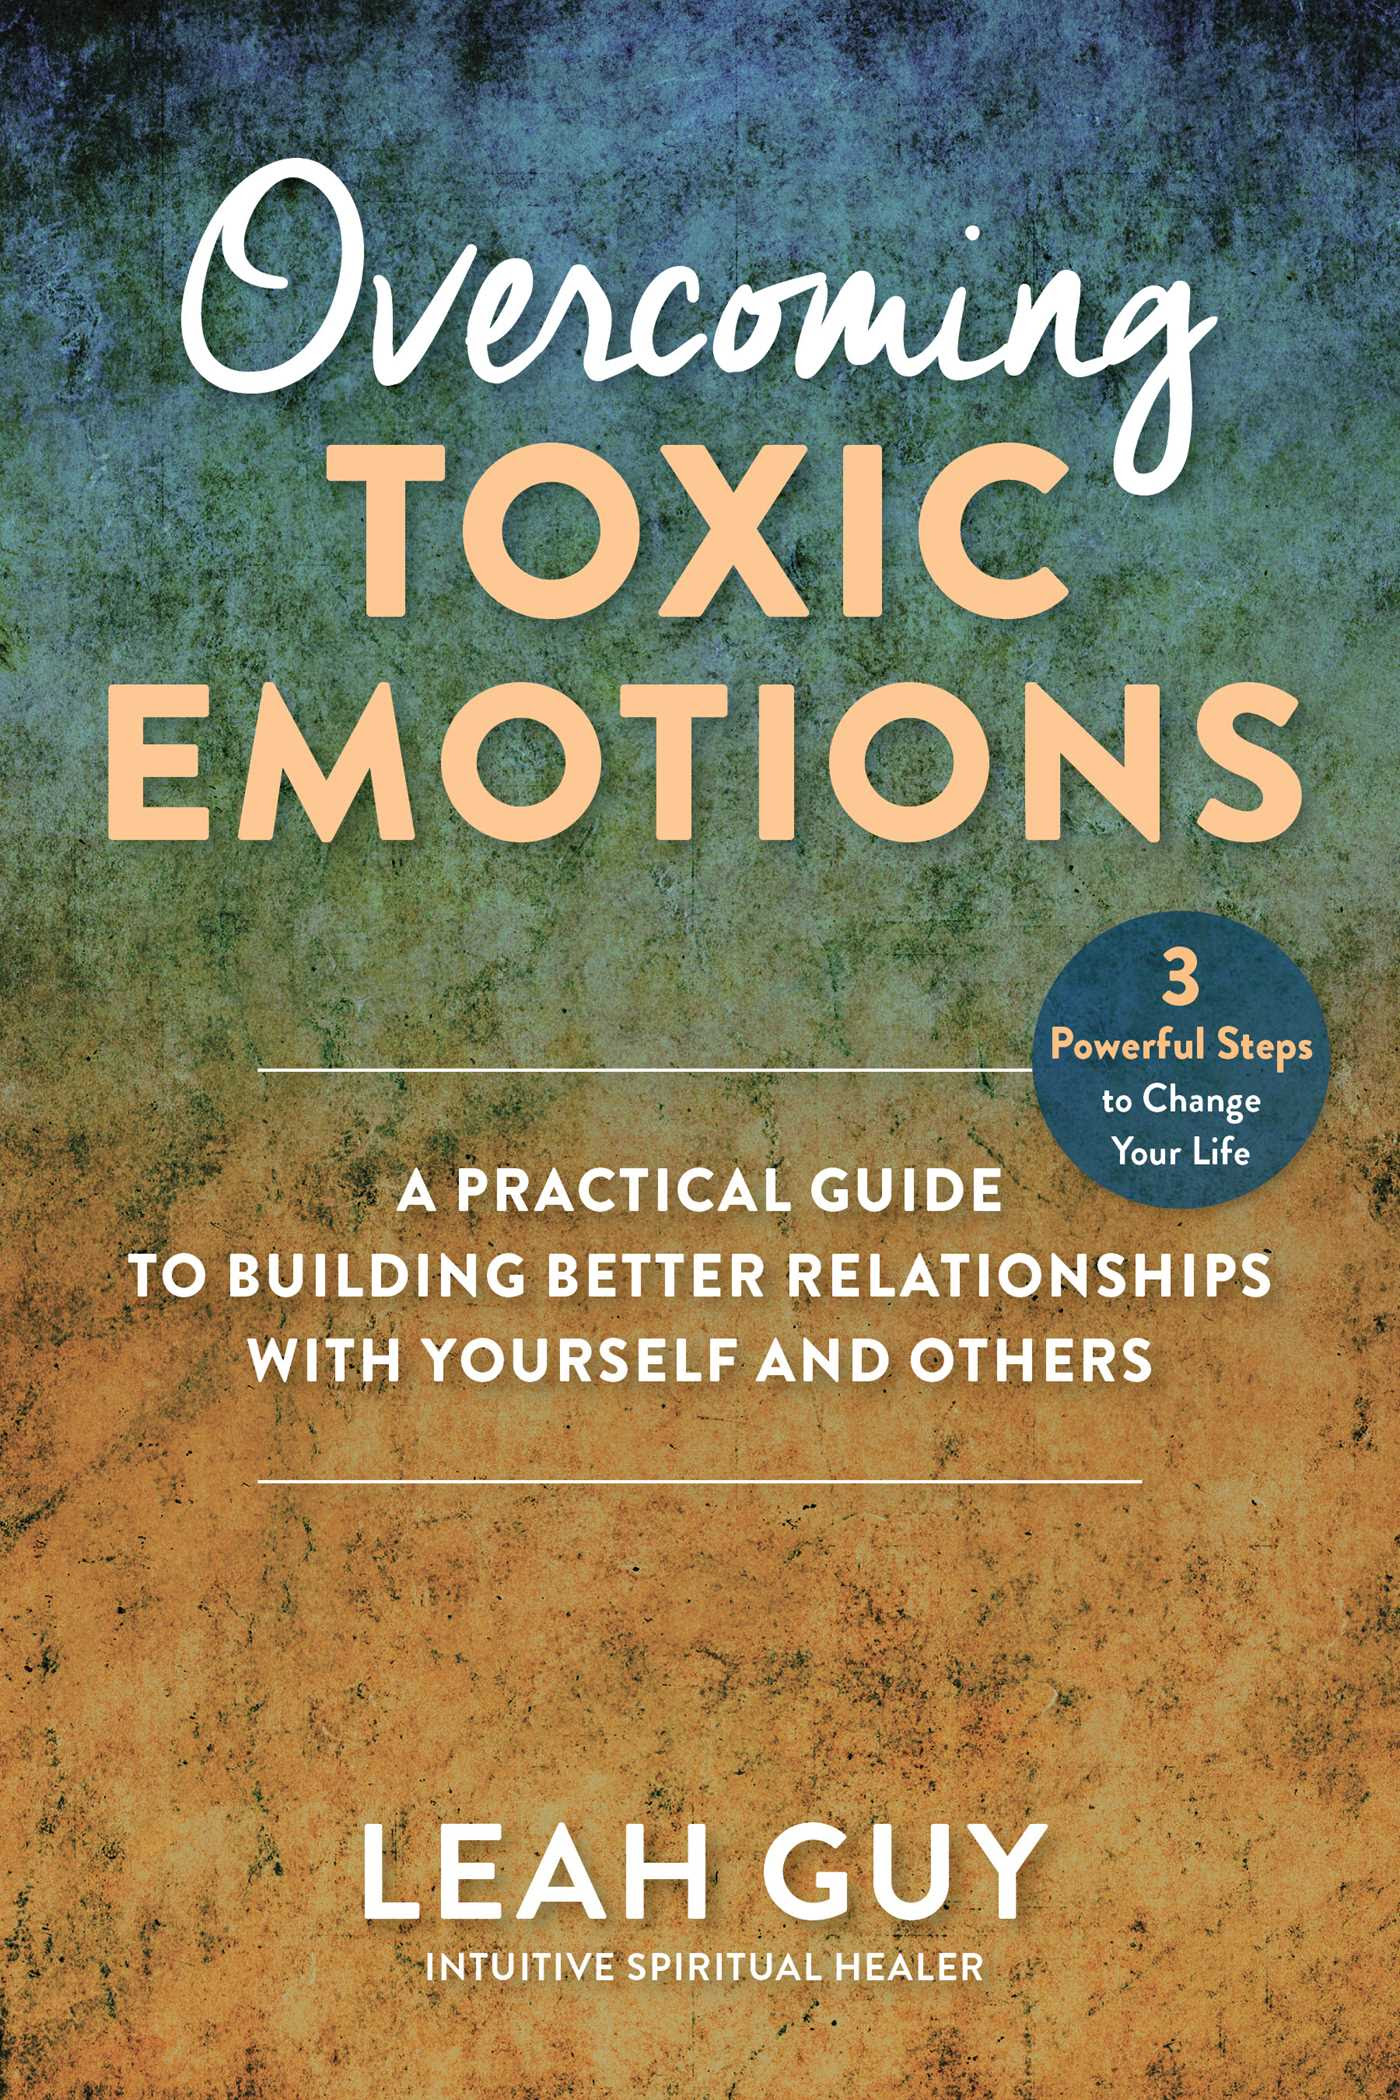 Overcoming Toxic Emotions: A Practical Guide to Building Better Relationships with Yourself and Others PDF